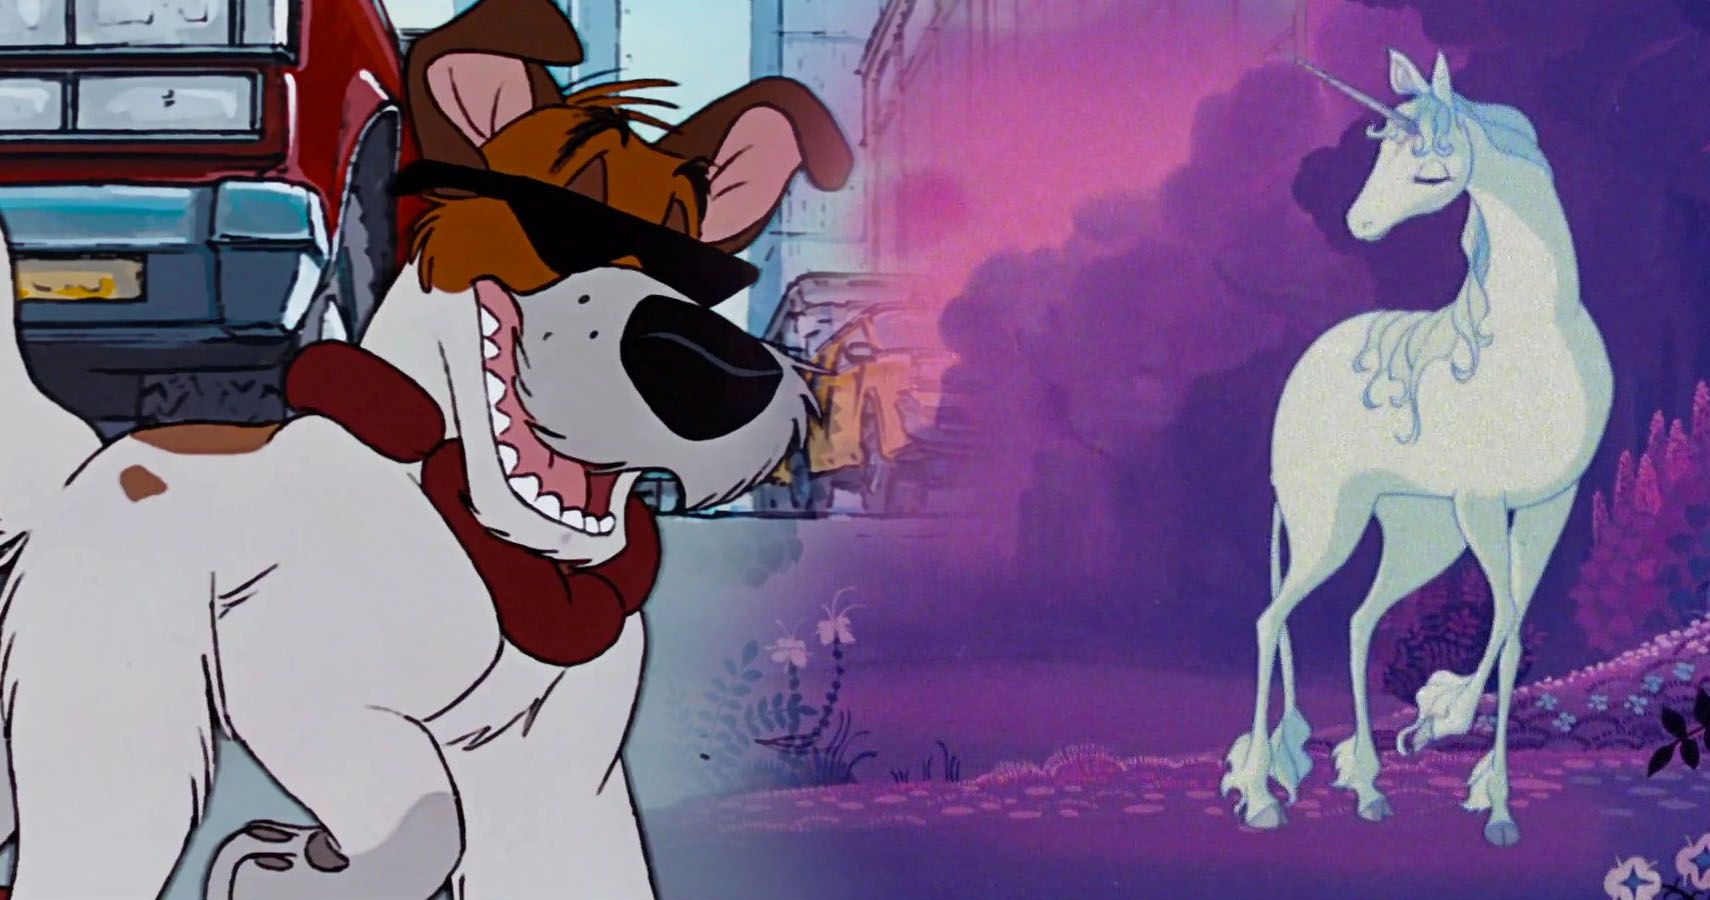 9 Underrated '80s Animated Movies Worth Re-Watching